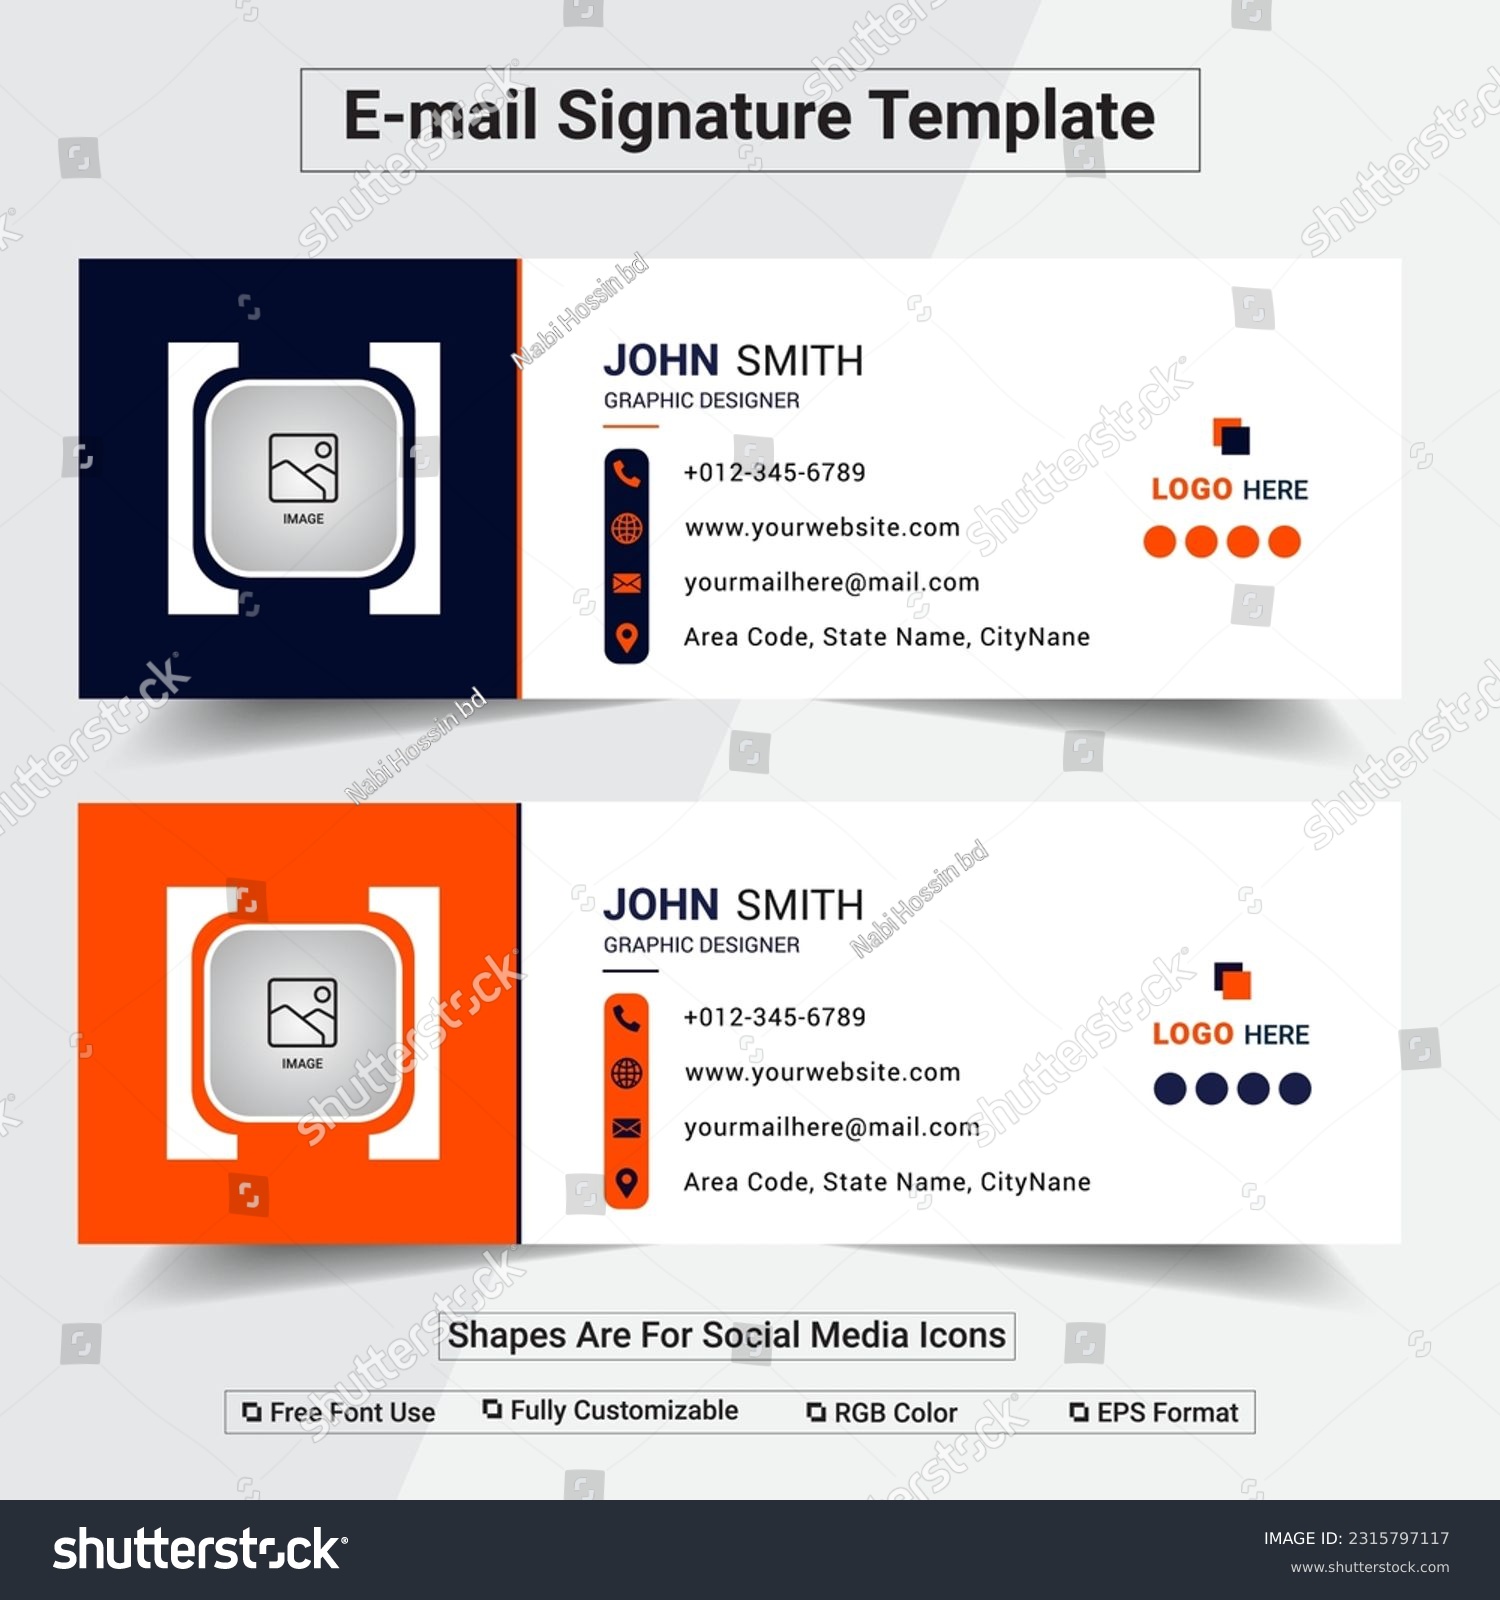 SVG of E-mail Signature Design Template.
creative email, custom email,  svg